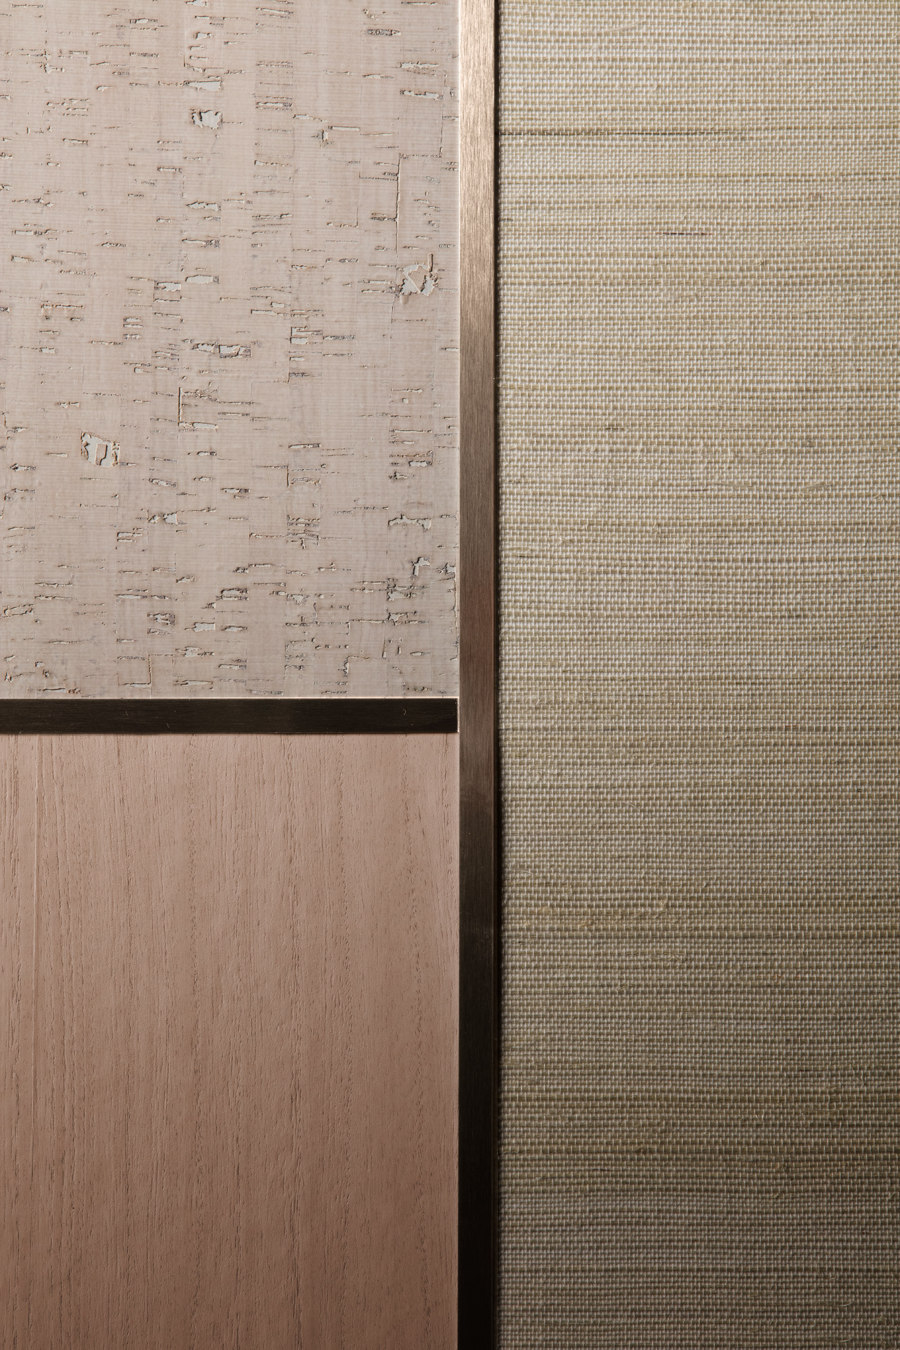 Evoking the beauty of Japanese artistry with large-scale, immersive wallcoverings | Novità